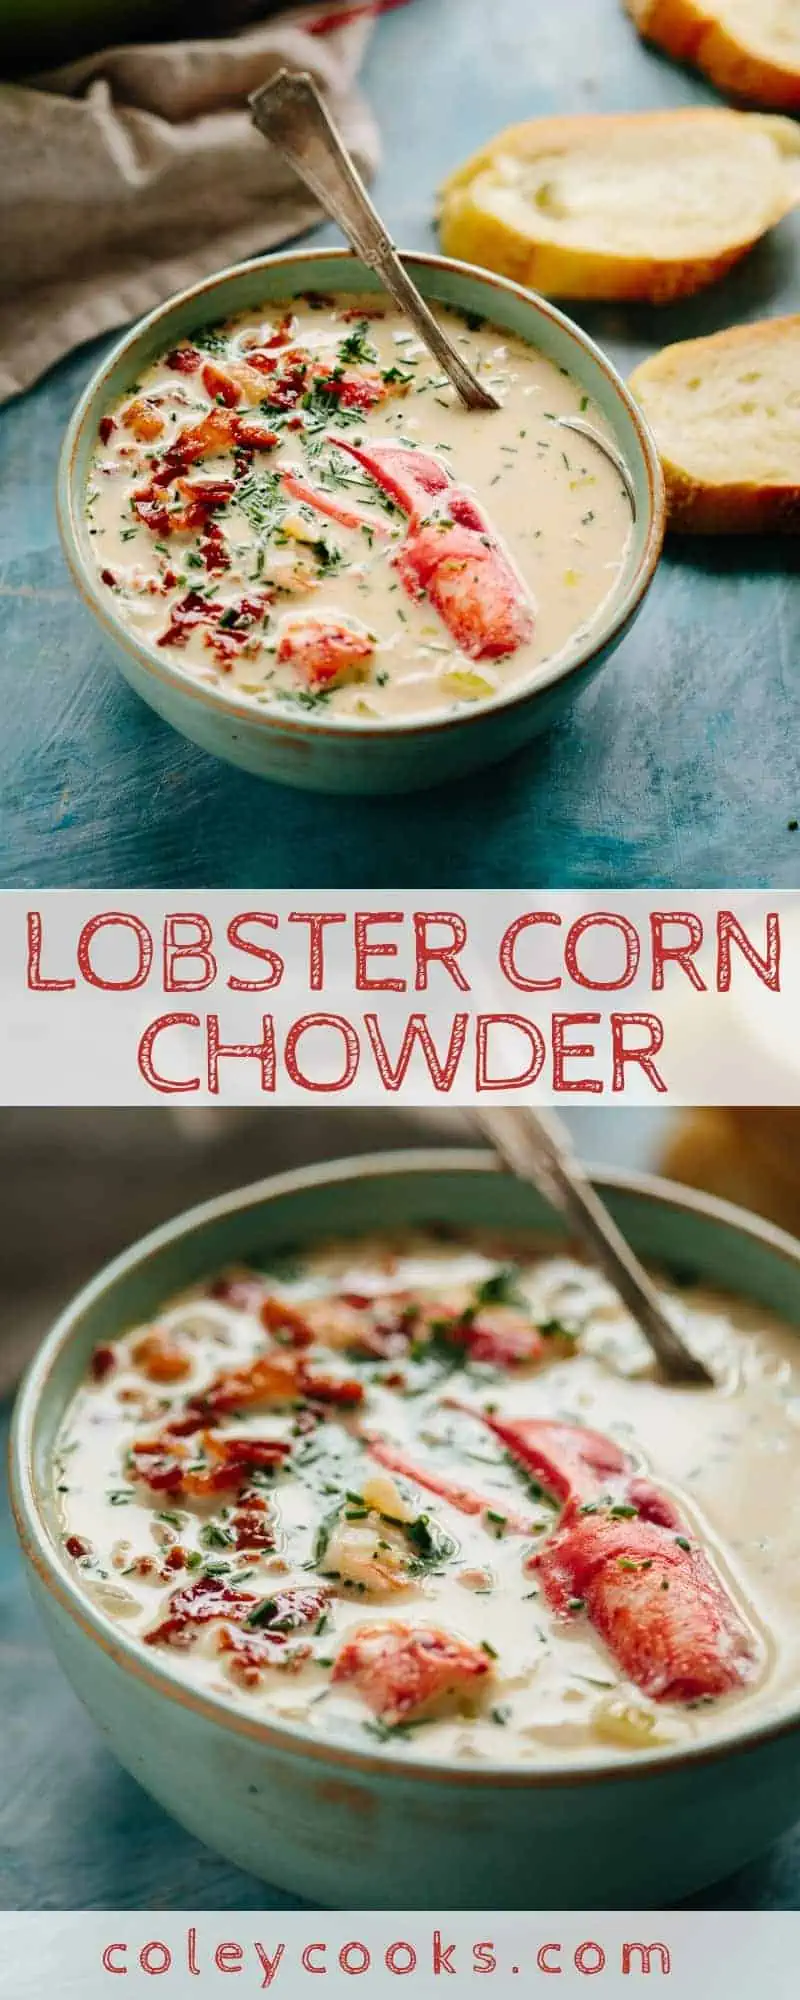 LOBSTER CORN CHOWDER | This recipe for lobster corn chowder is the perfect way to usher in fall. It's rich, flavorful and loaded with big chunks of lobster meat. #soup #lobster #corn #chowder #recipe #seafood | ColeyCooks.com